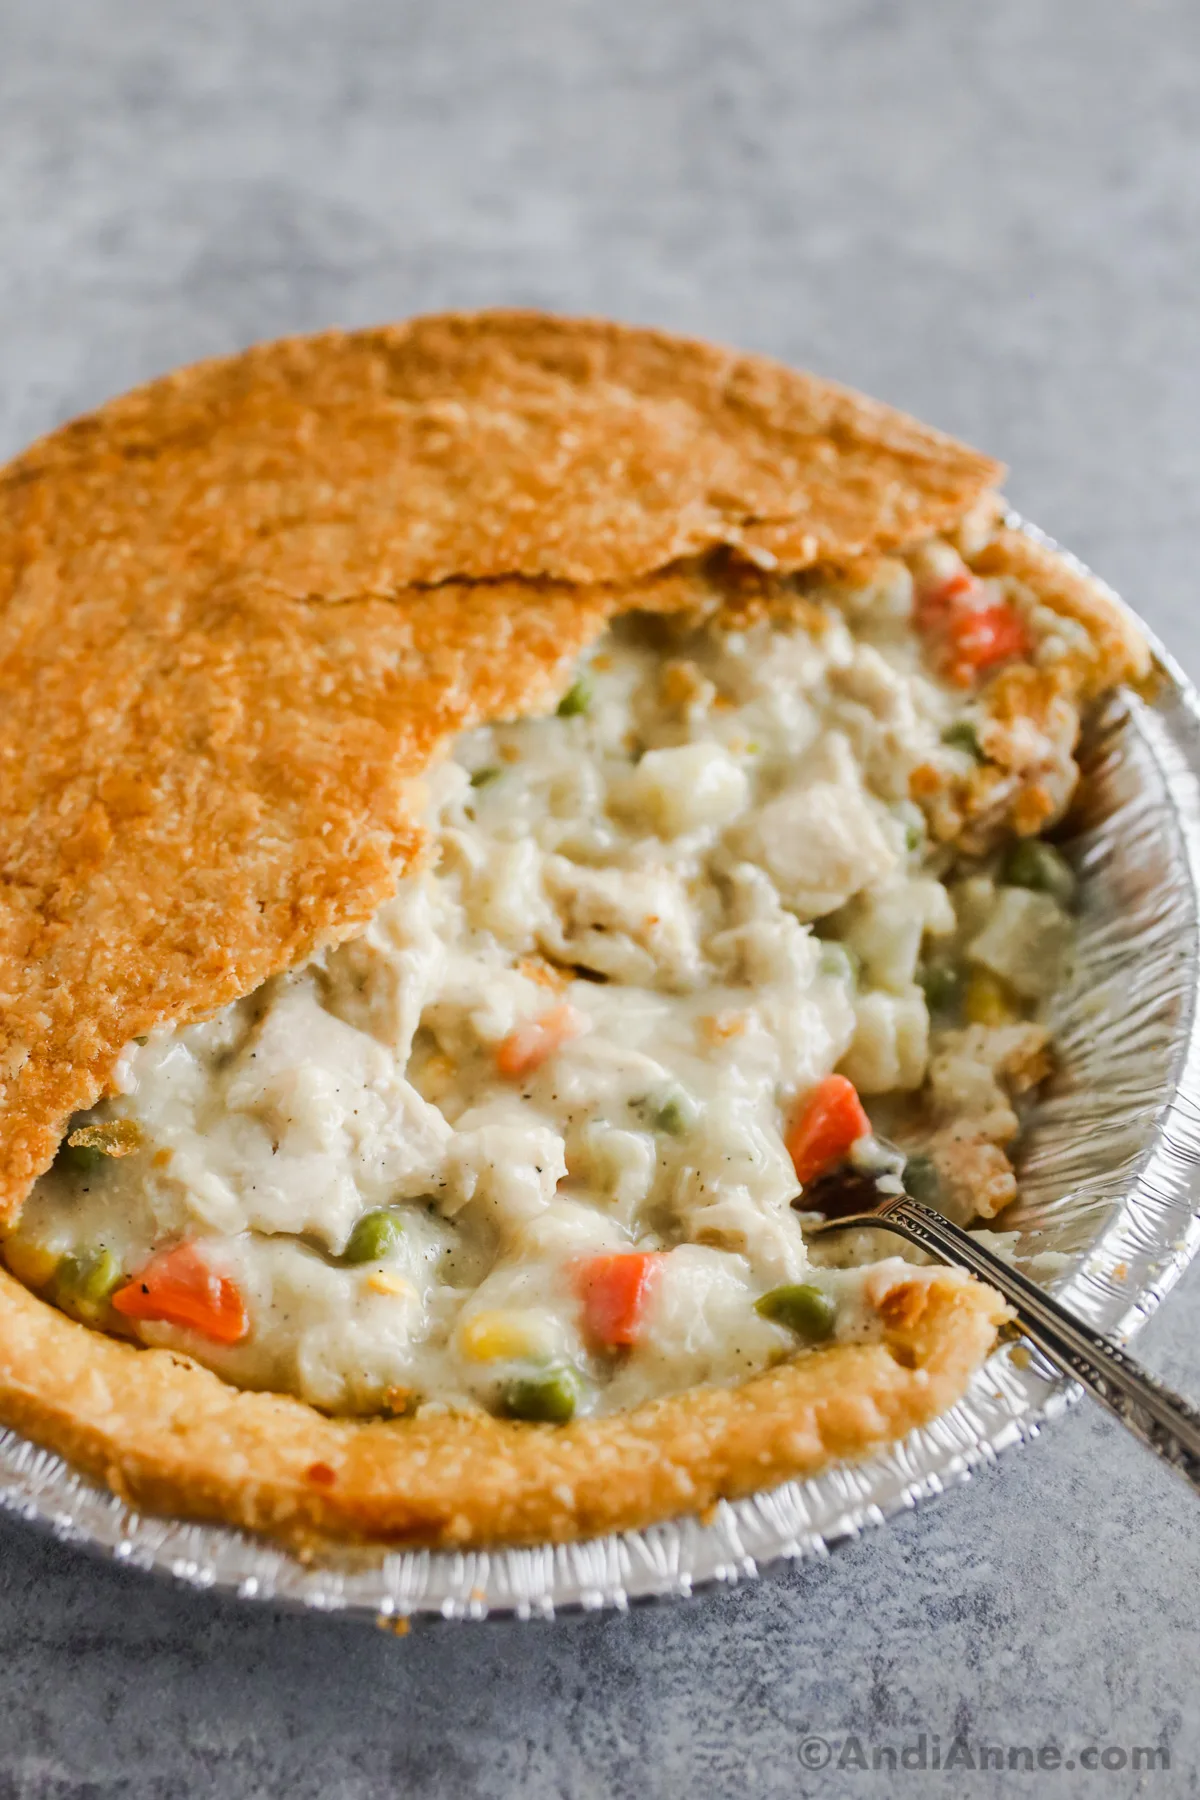 Close up of the costco chicken pot pie with filling.